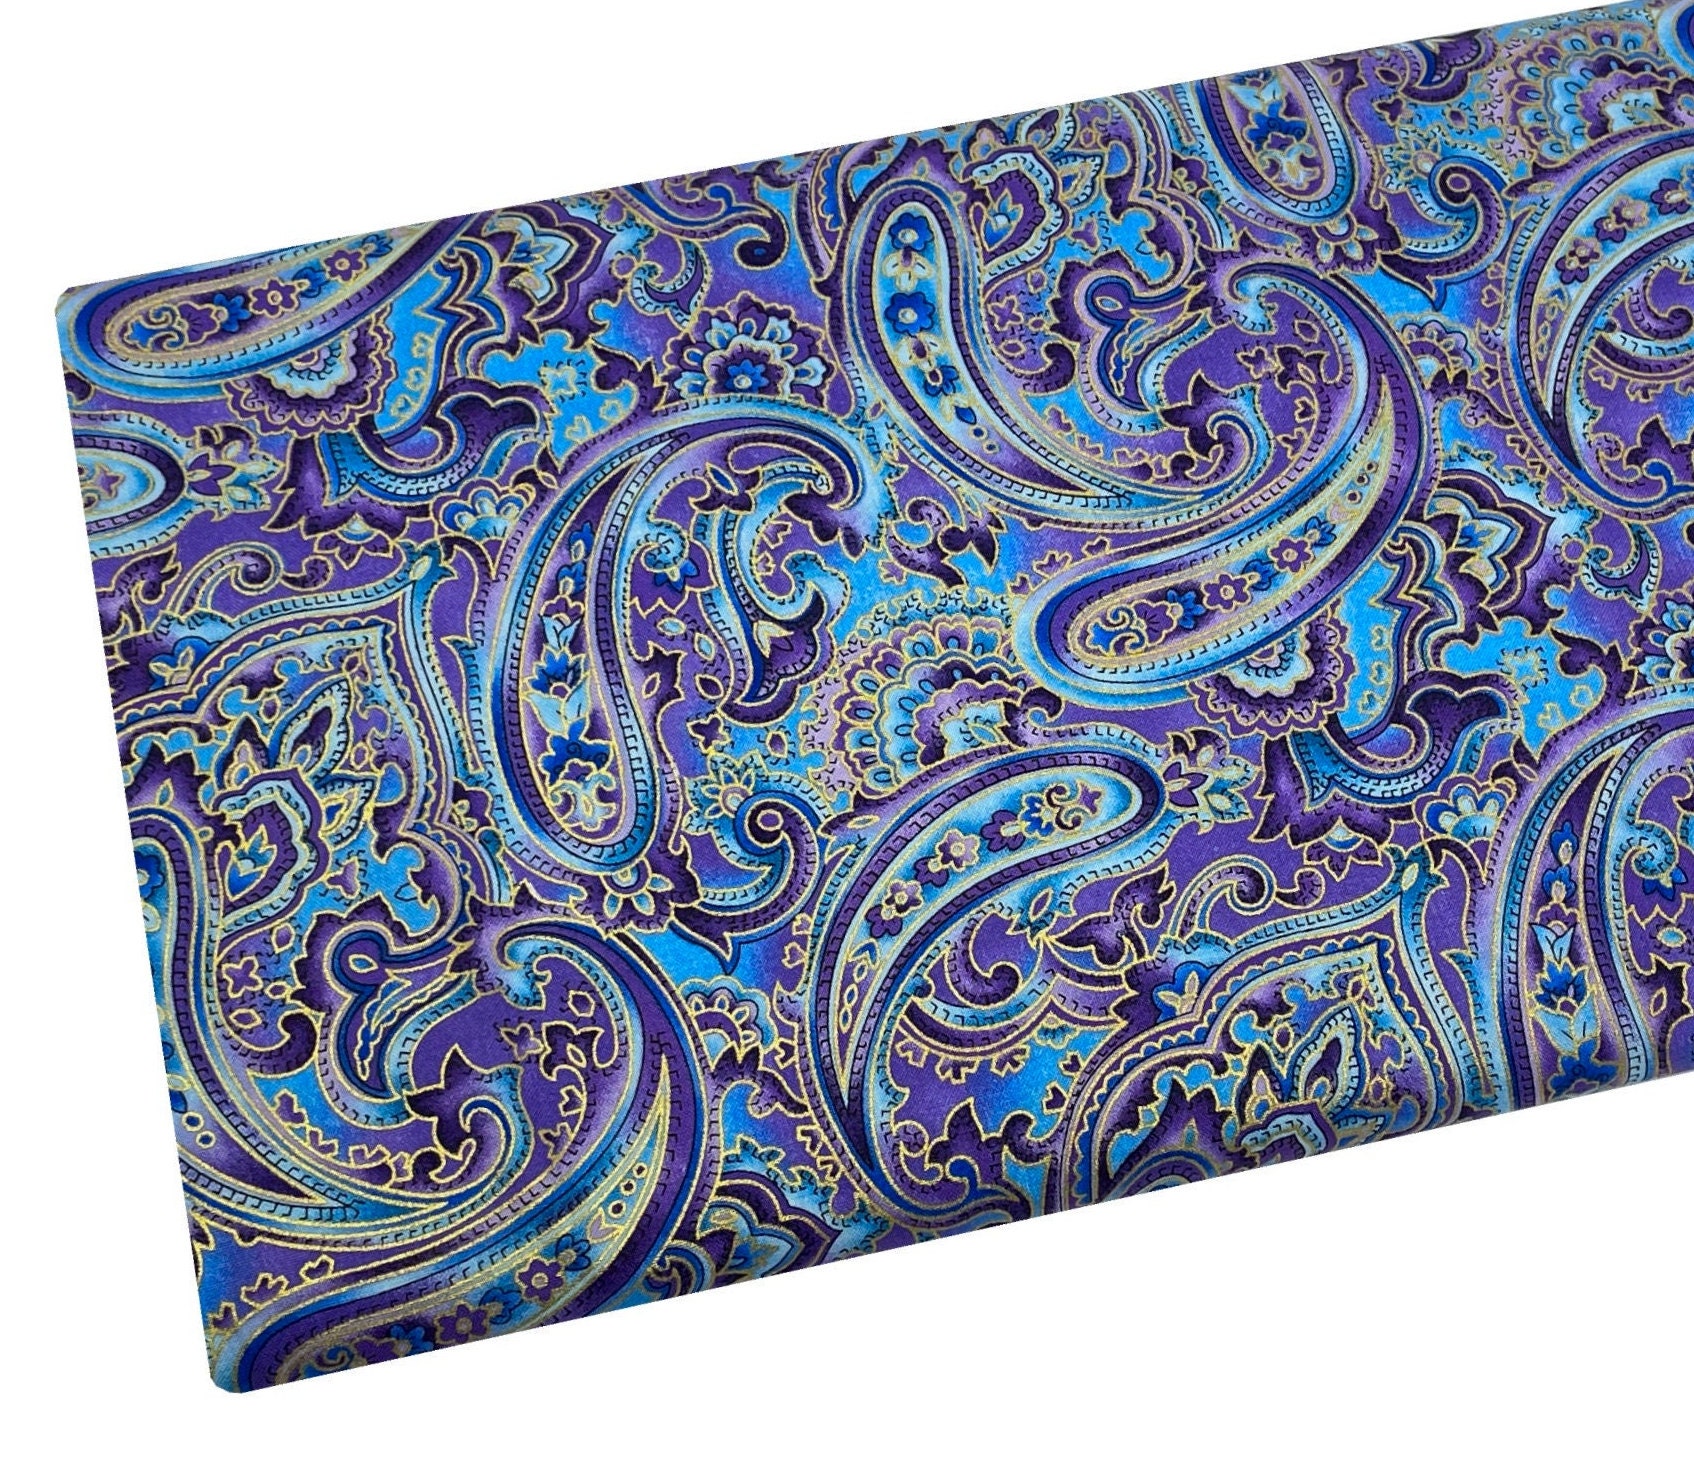 Blue and Purple Metallic Paisley Fabric by Hi-fashion Fabrics, Fabric by  the Yard, Fat Quarter, Quilting, Apparel, 100% Cotton, R4-25 